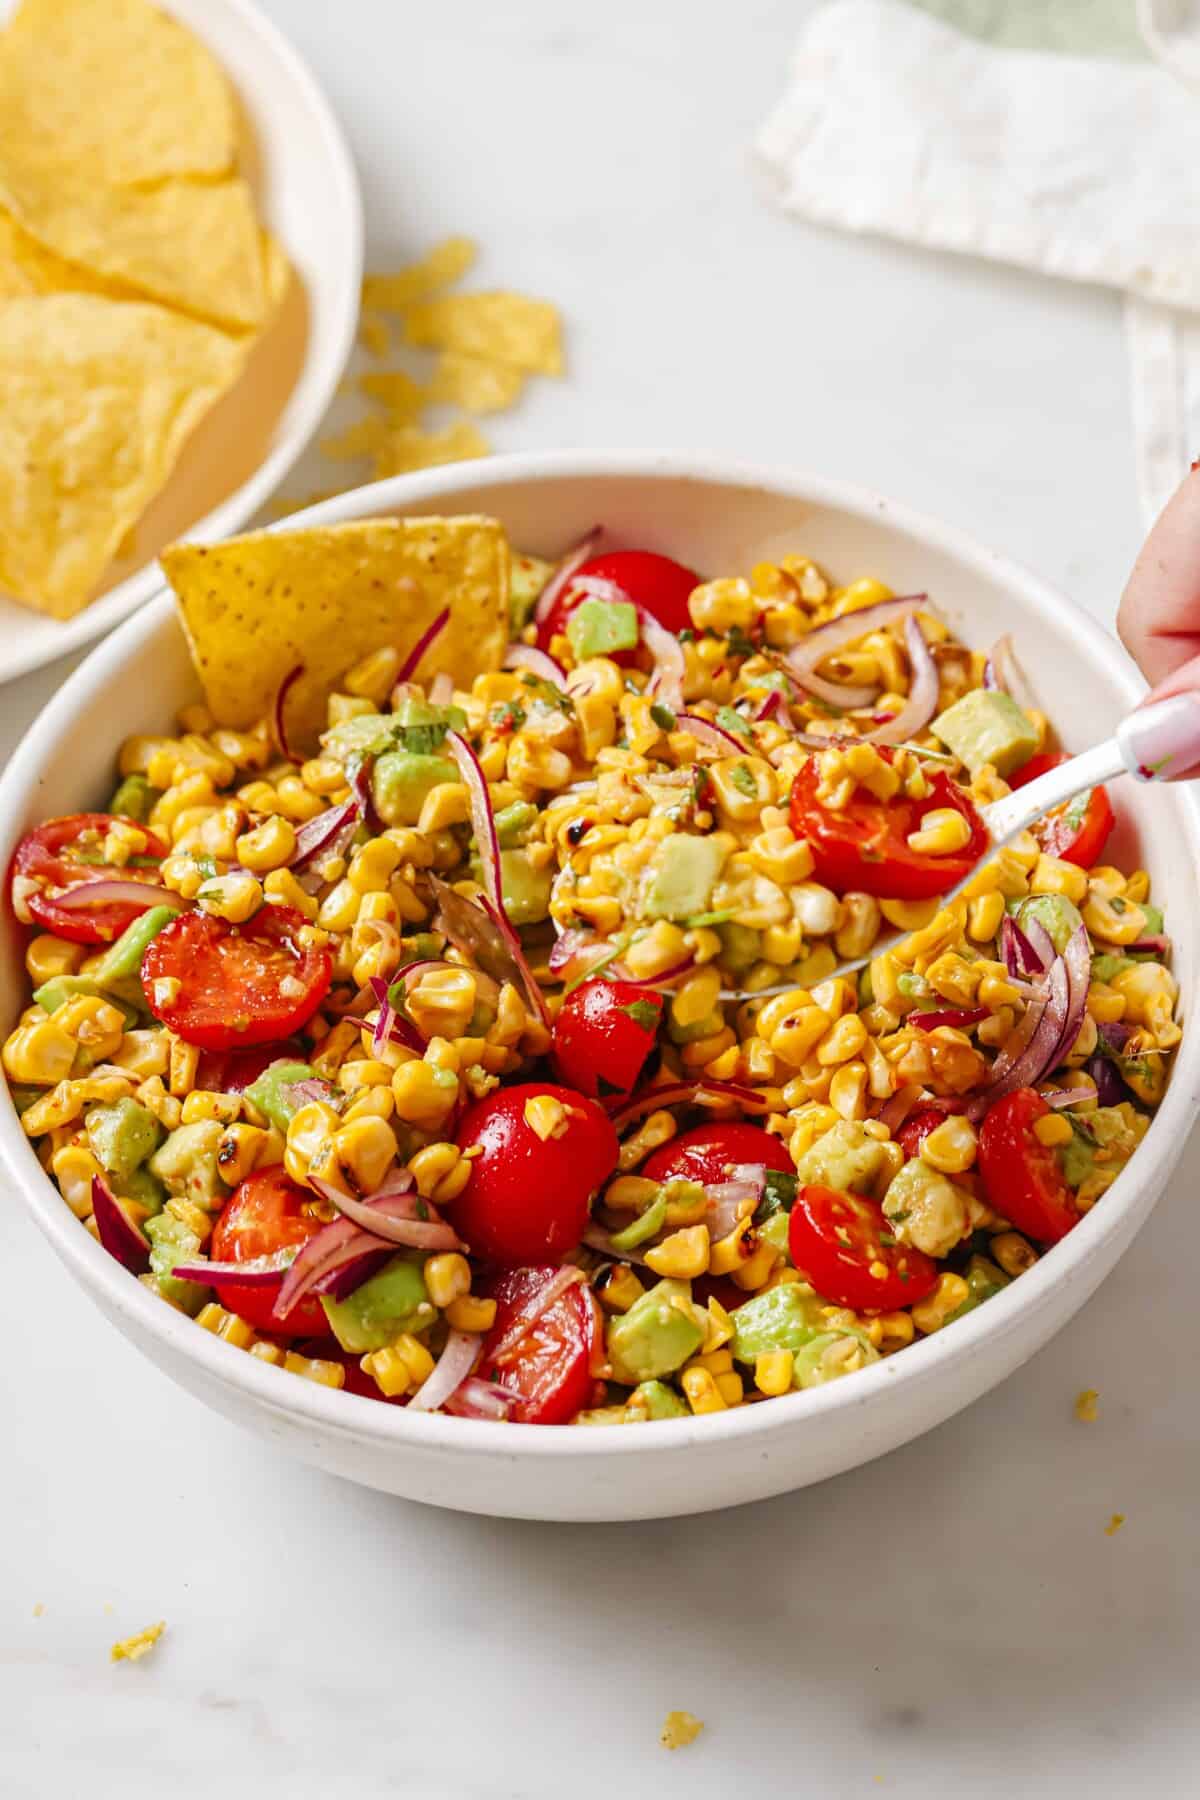 Bowl of avocado corn salad with corn chips.